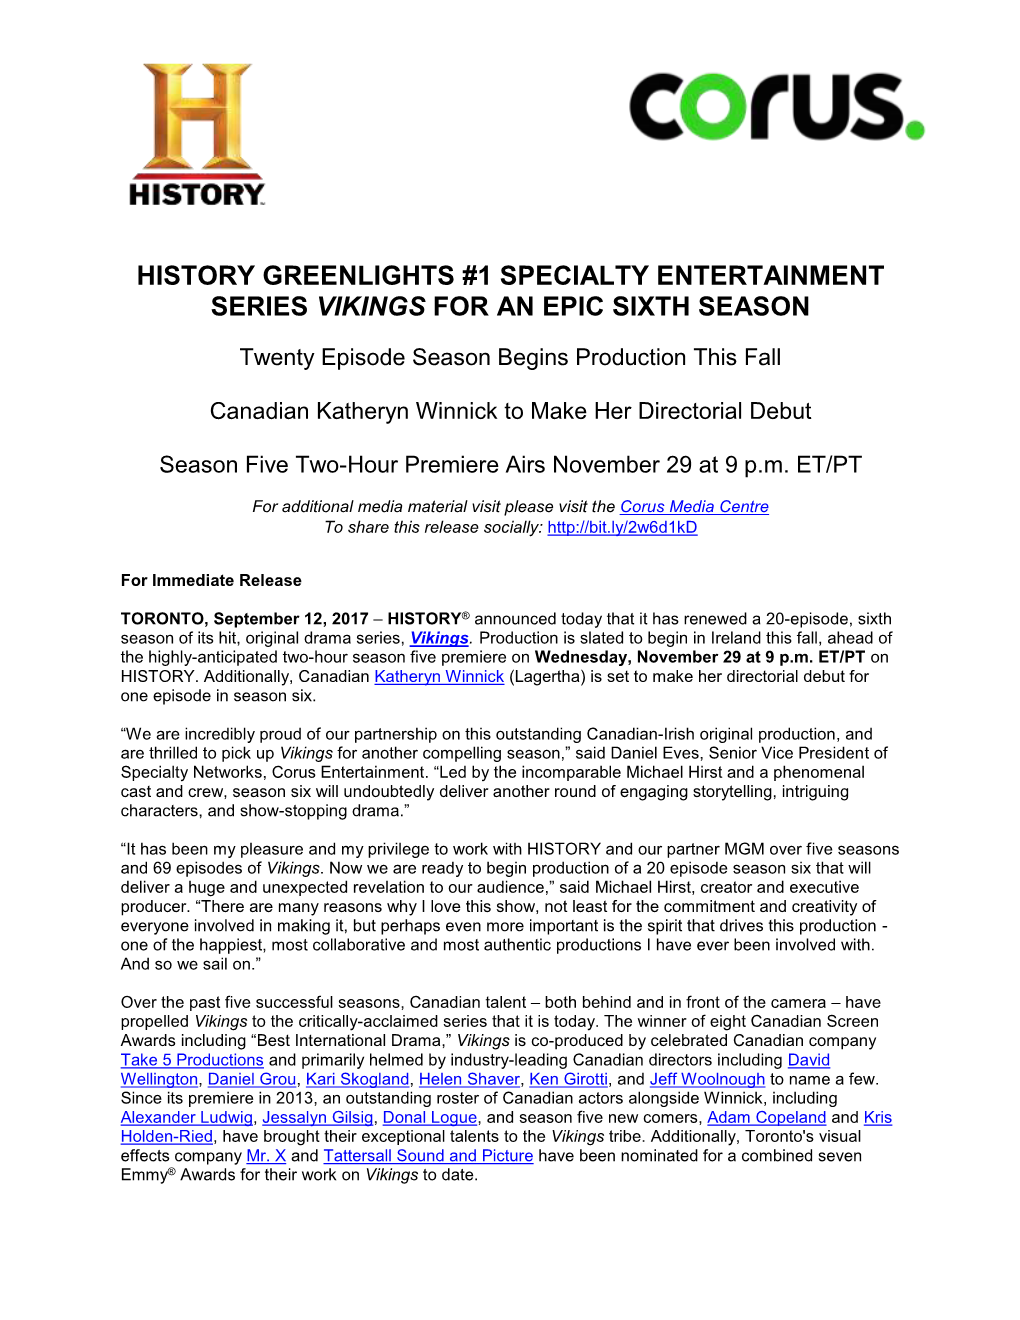 History Greenlights #1 Specialty Entertainment Series Vikings for an Epic Sixth Season